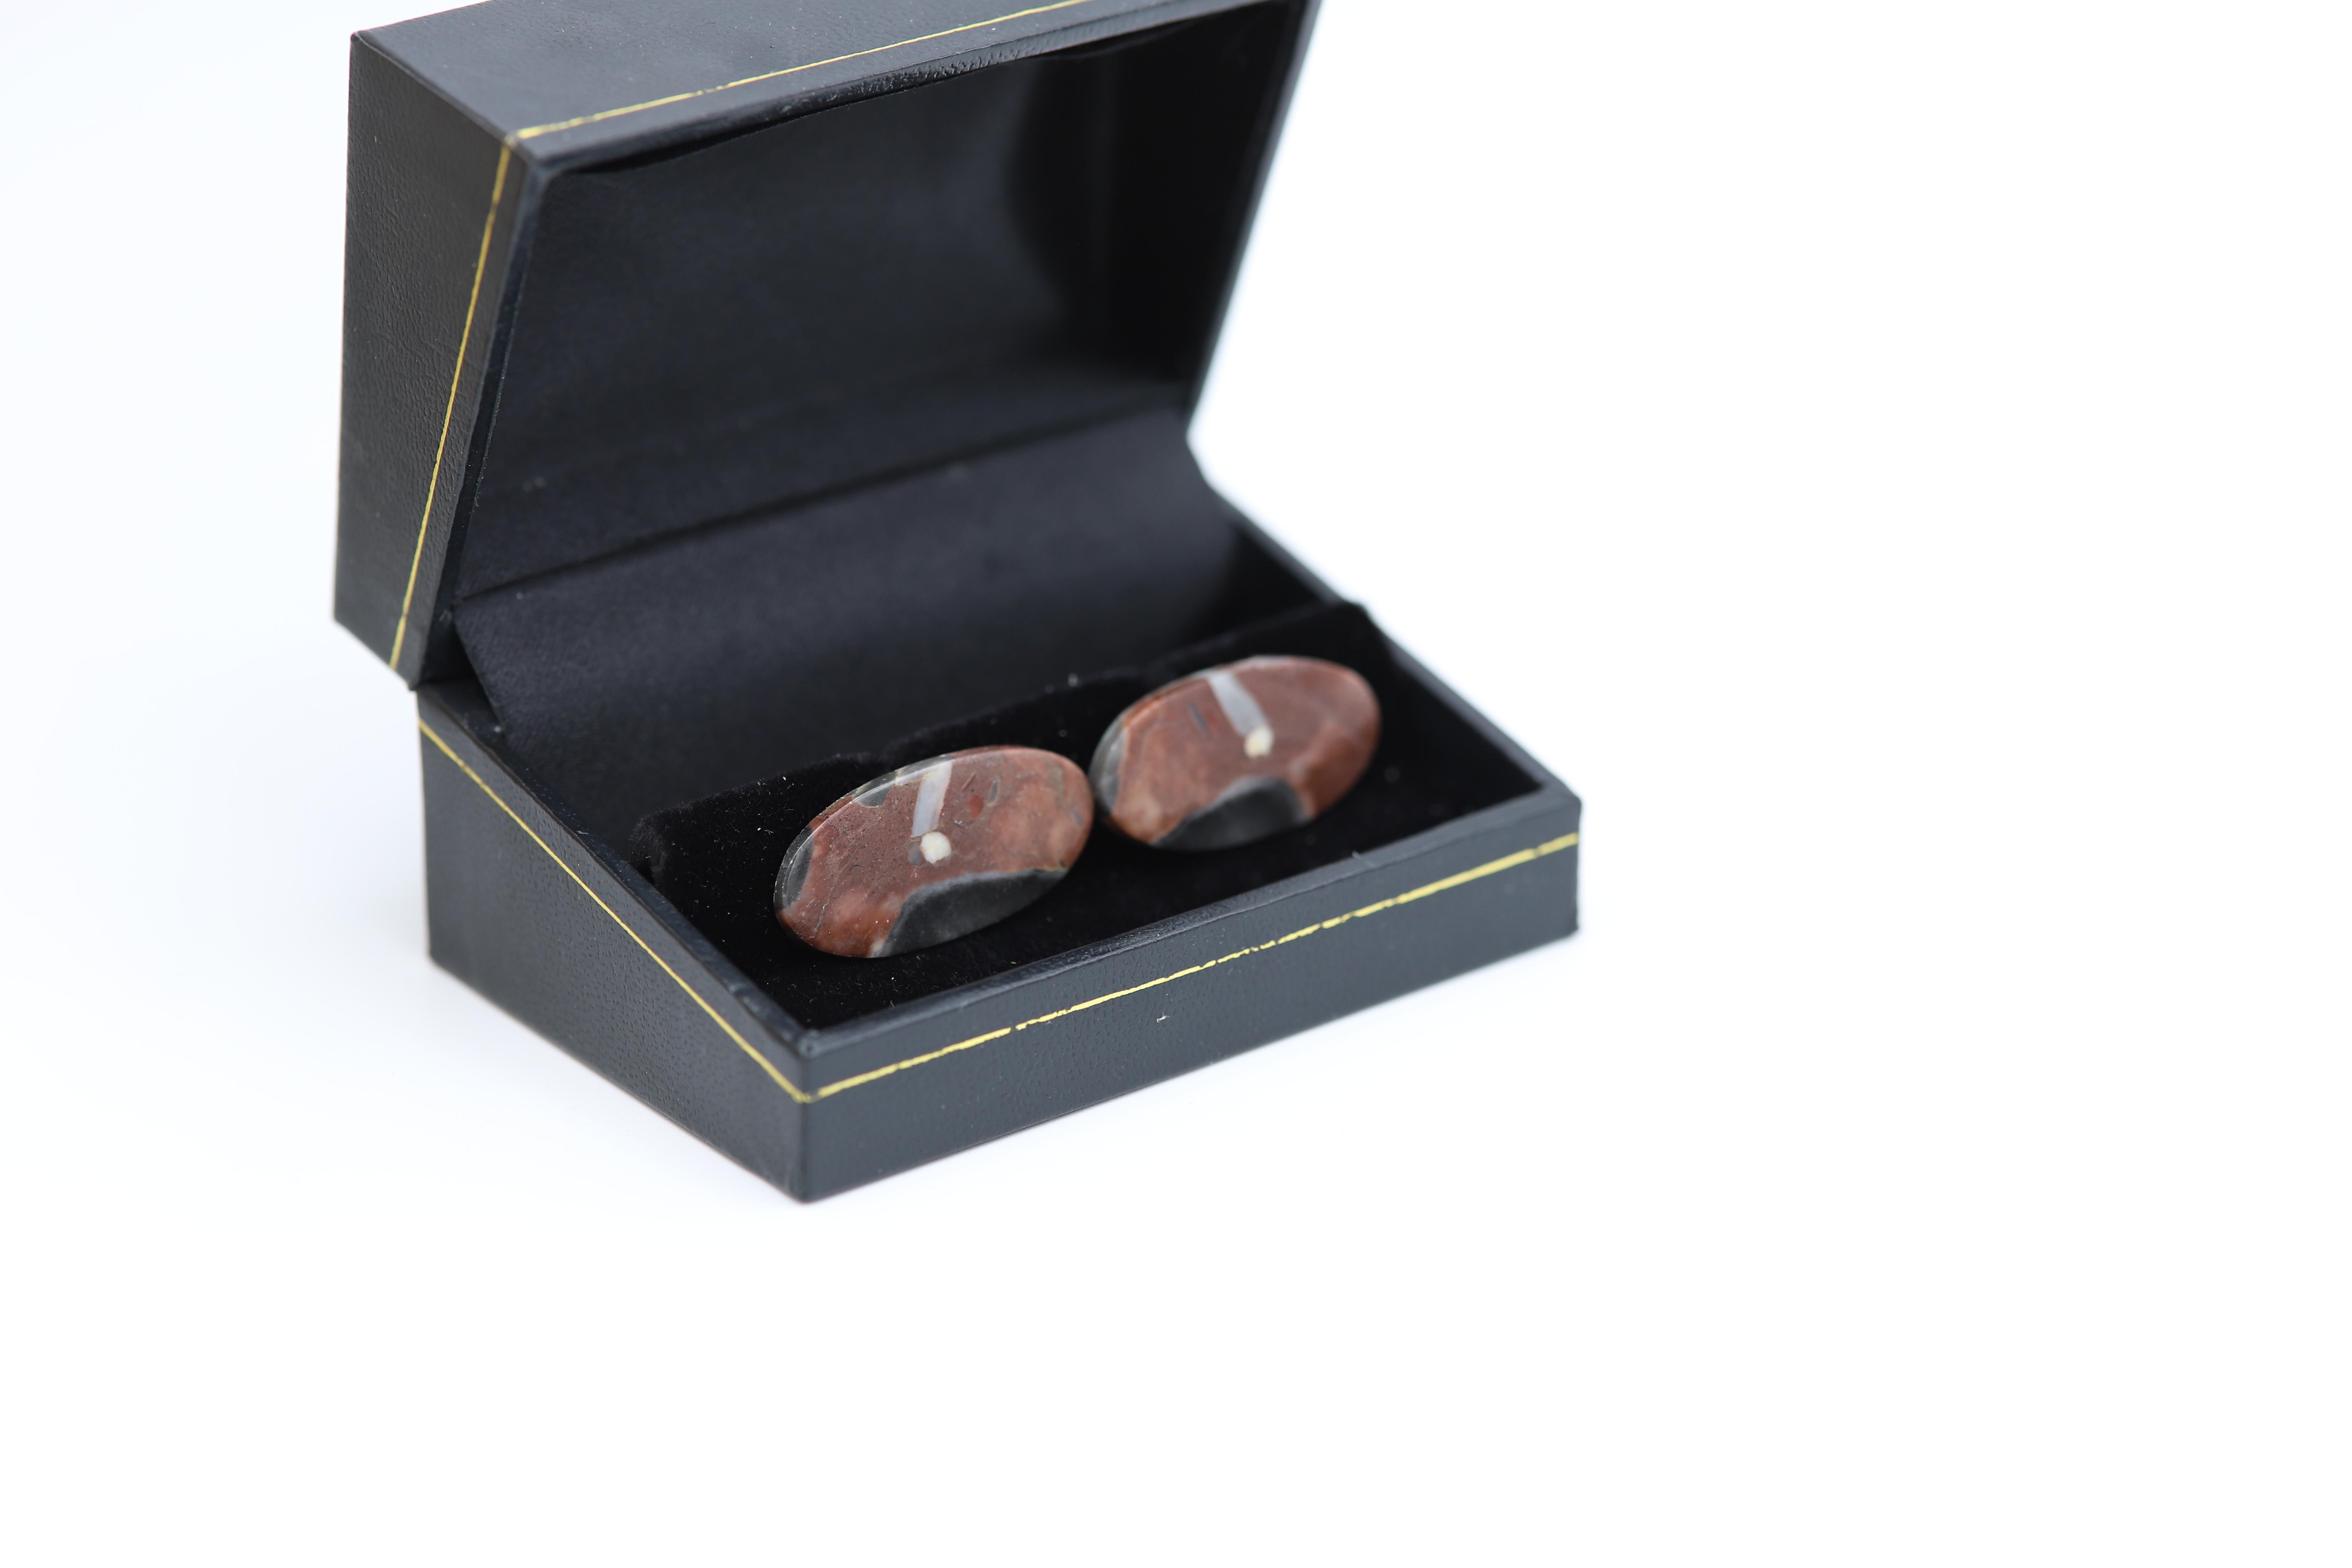 New unique men's cufflink - natural stone.
Stone name: Mookaite Jasper
Approx. size 28 X 13 MM
Beautiful natural texture.
Imperfection may exist due to natural formations.
Back part metal is a general alloy metal - none precious
Gift Box